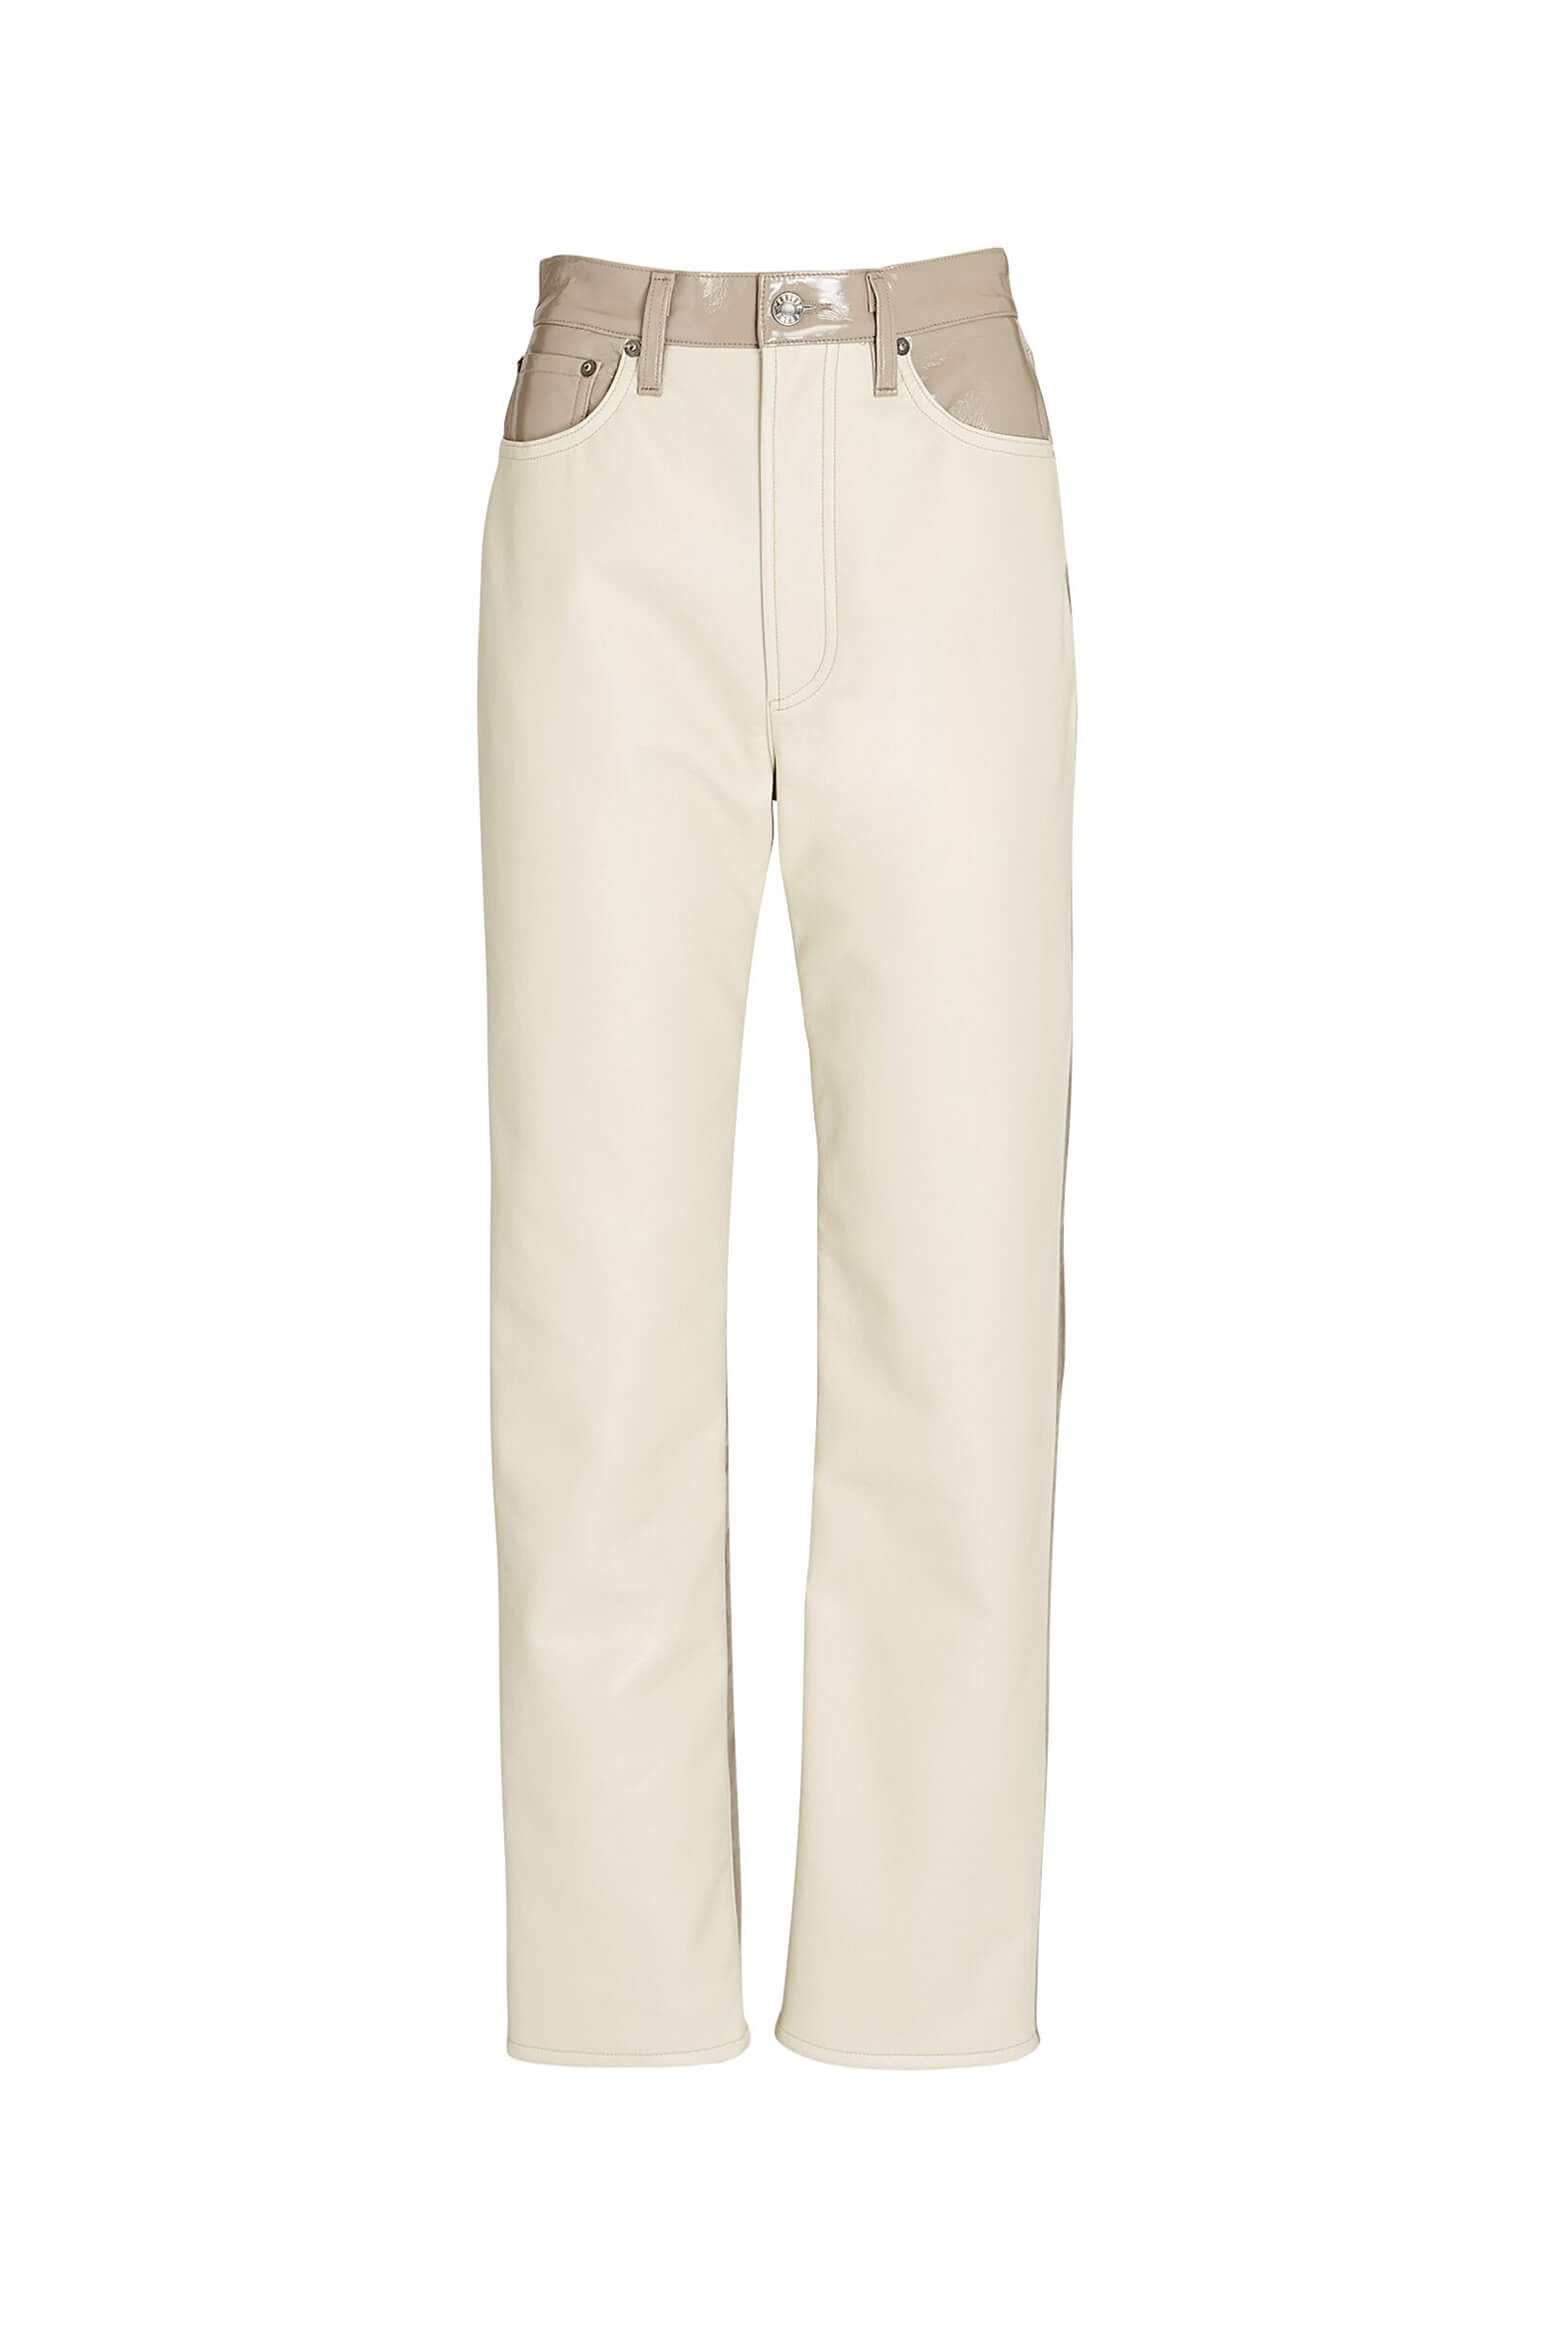 Agolde Panelled Recycled Leather 90's Pinchwaist Pants in Powder and Quail from The New Trend